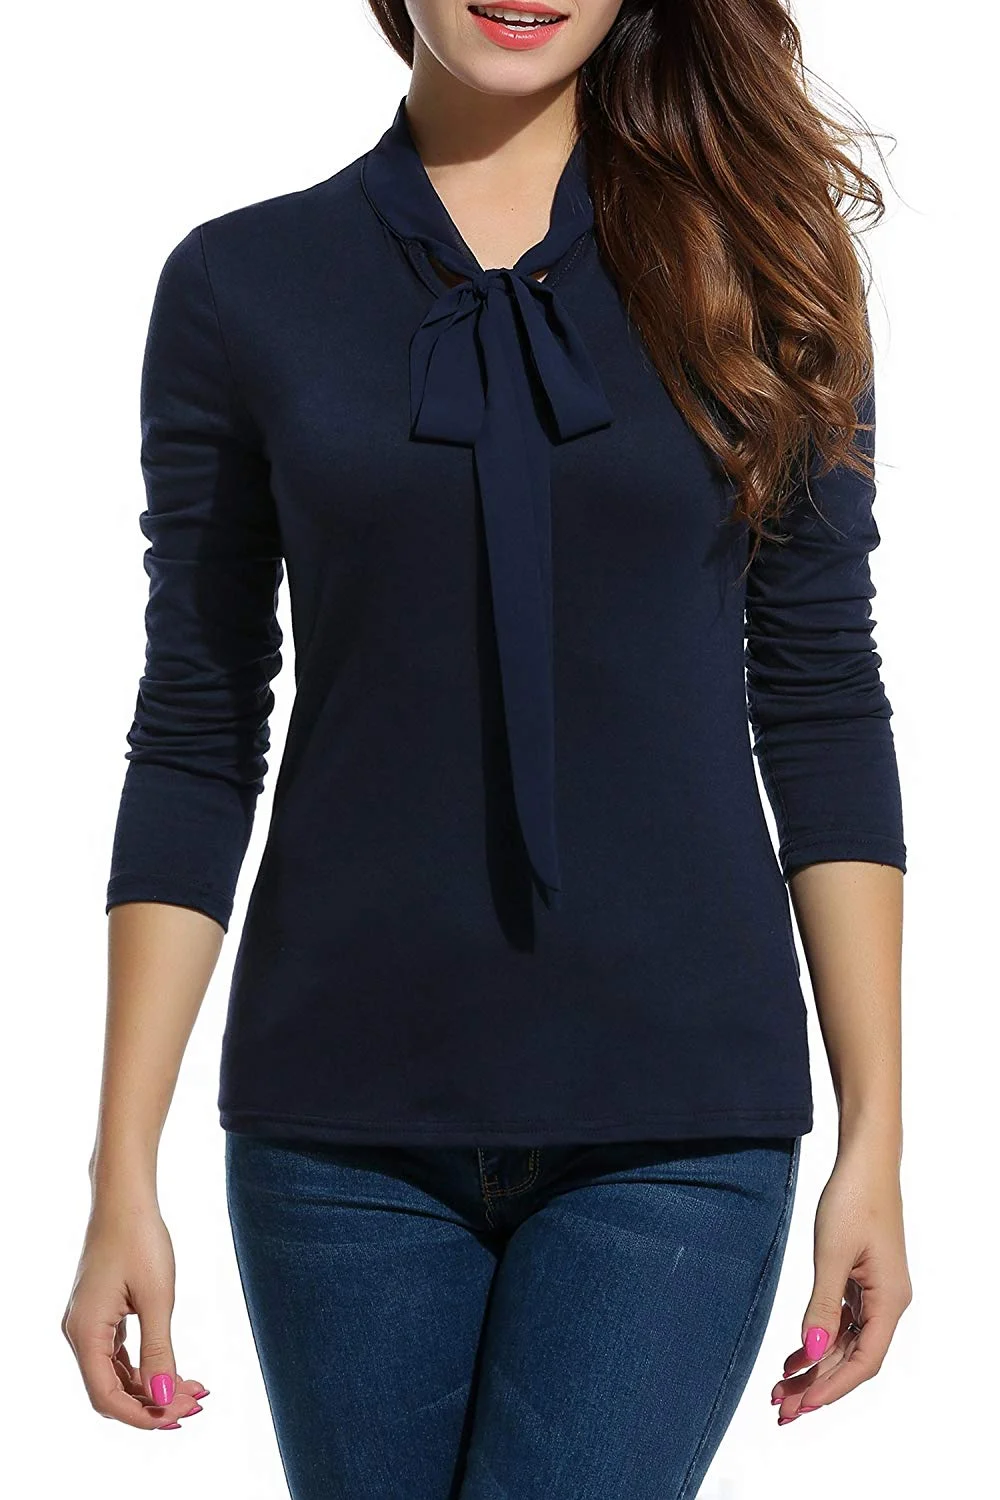 Tie-Bow Neck Cuffed Sleeve Office Shirt Slim Solid Long Sleeve Blouse